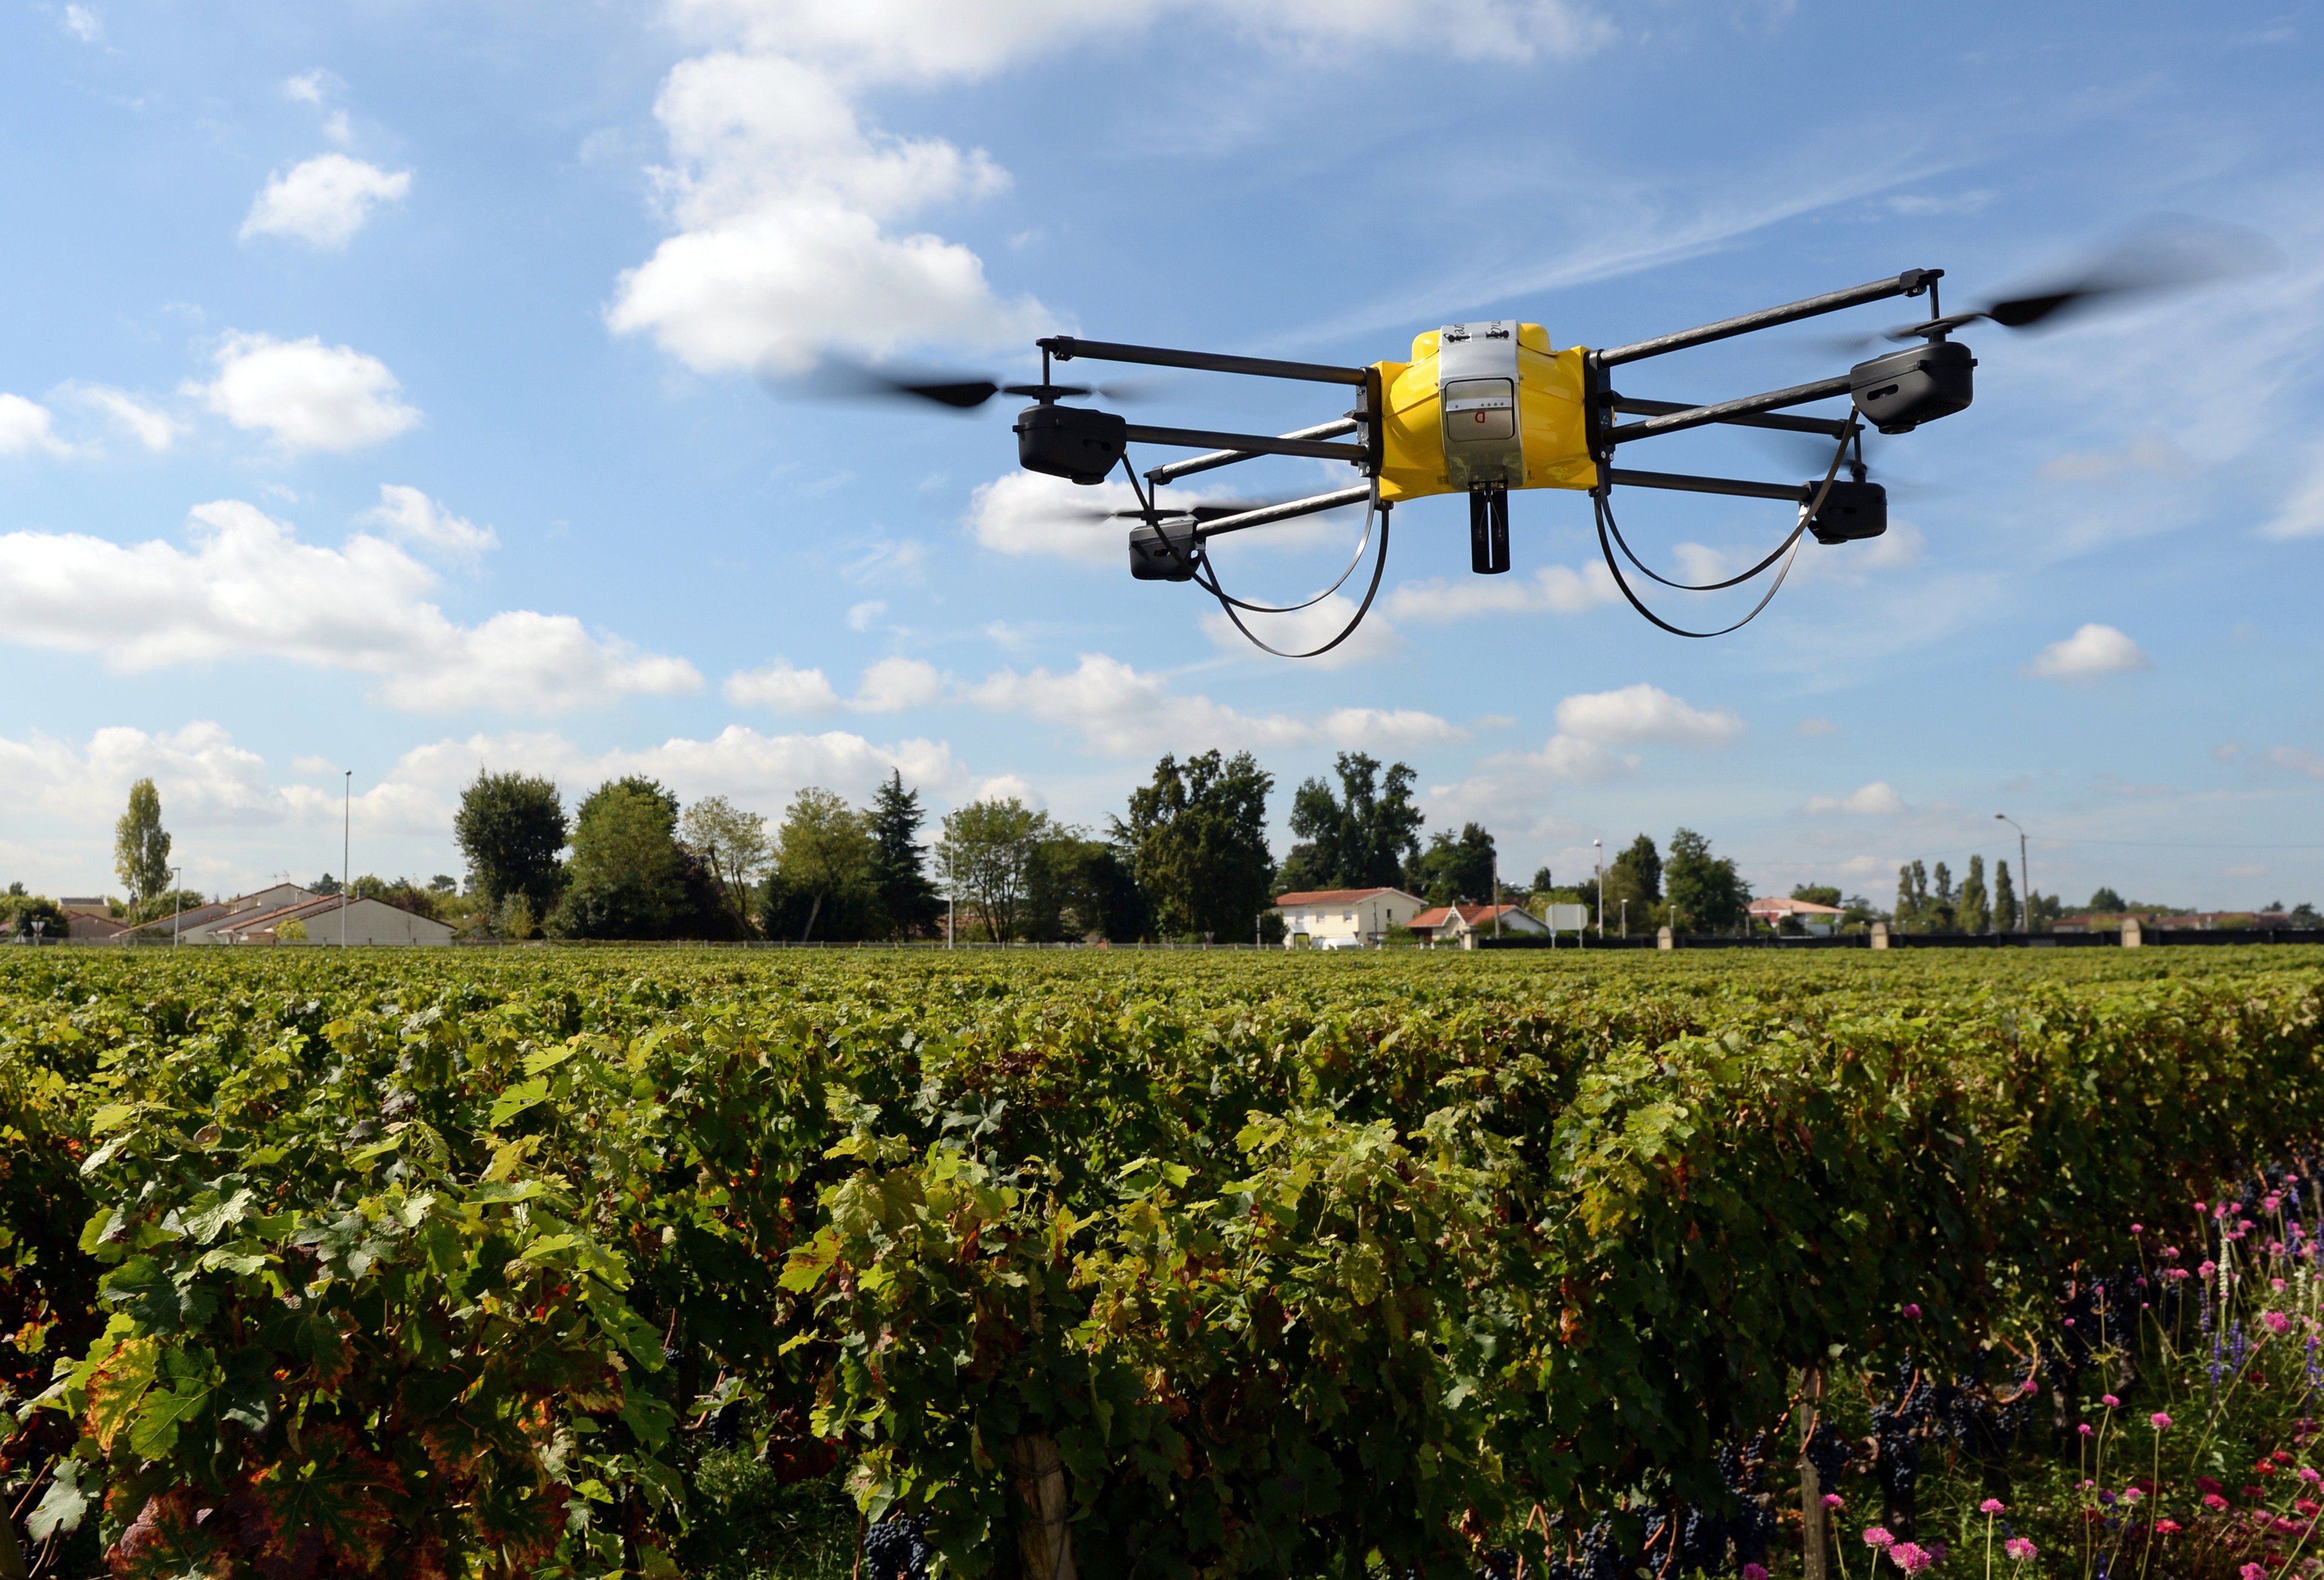 A photo taken on September 9, 2014 shows a drone flying over vineyards of the Pape Clement castle in the soutwestern French town of Pessac. (Jean Pierre Muller—AFP/Getty Images)